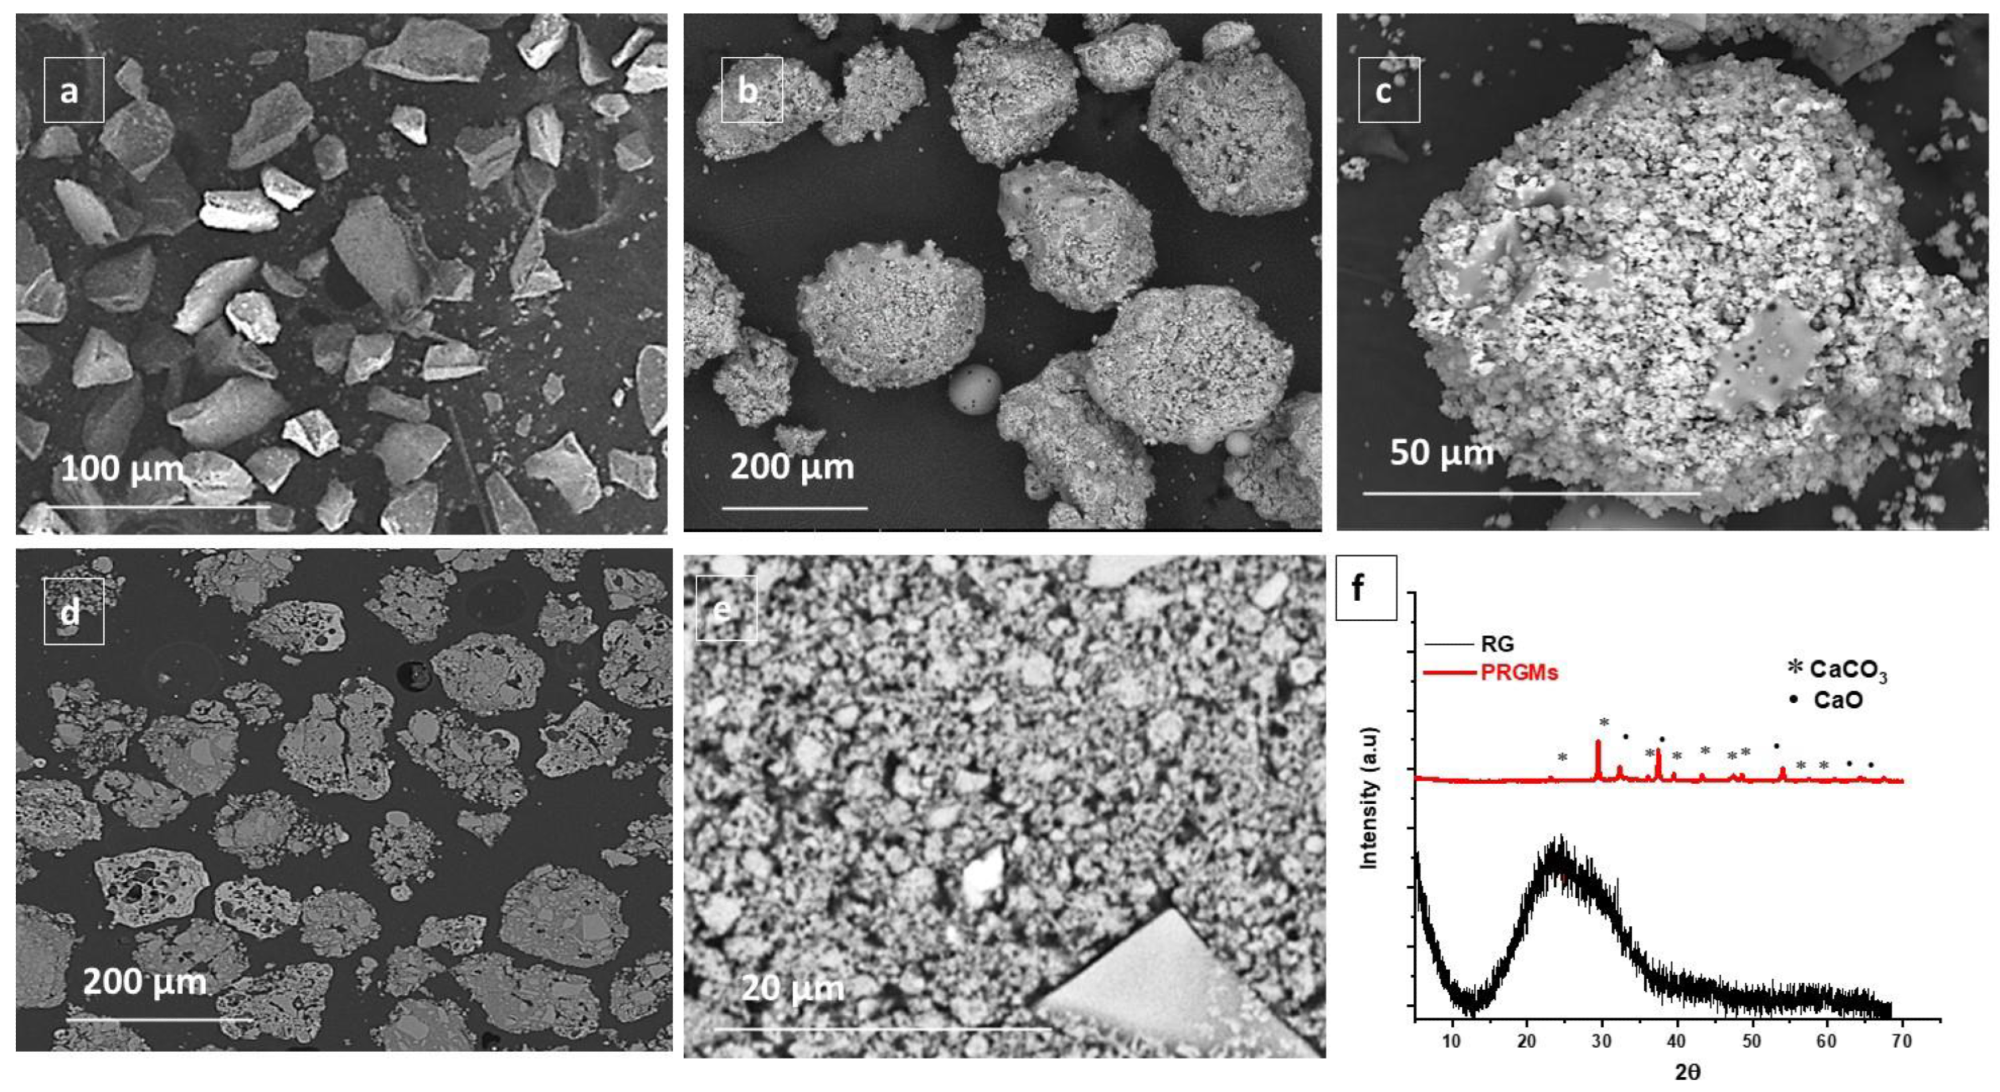 SEM images of (a) as received RG (particle size = 63 µm), (b,c) surface morphology of porous recycled glass microspheres (PRGMs) at different magnification, (d,e) cross-section of PRGMs at different magnification and (f) XRD pattern of RG and PRGMs.